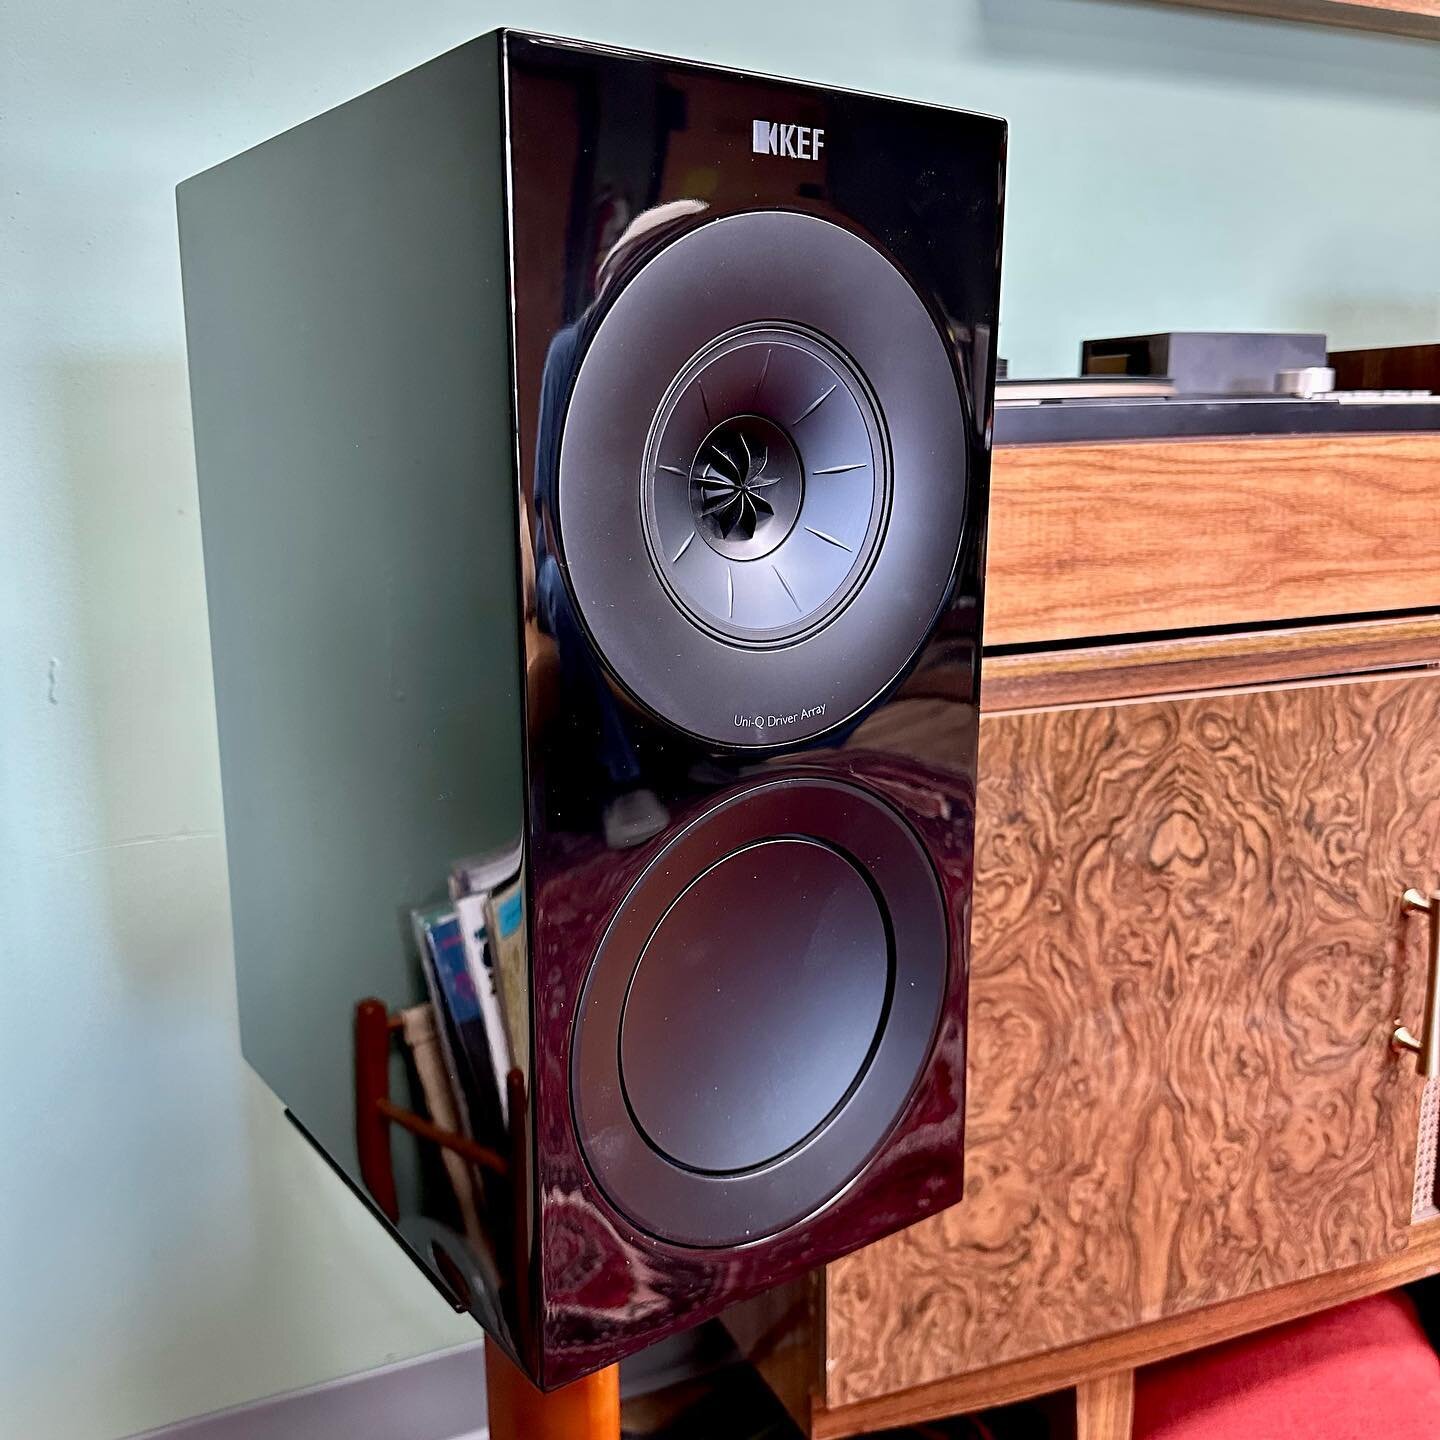 [AVAILABLE] These KEF R3 piano black bookshelf speakers incorporate many technologies developed for the much costlier &ldquo;Reference&rdquo; series and the results are top-quality performance at a fraction of the price.
They are a true 3-way speaker